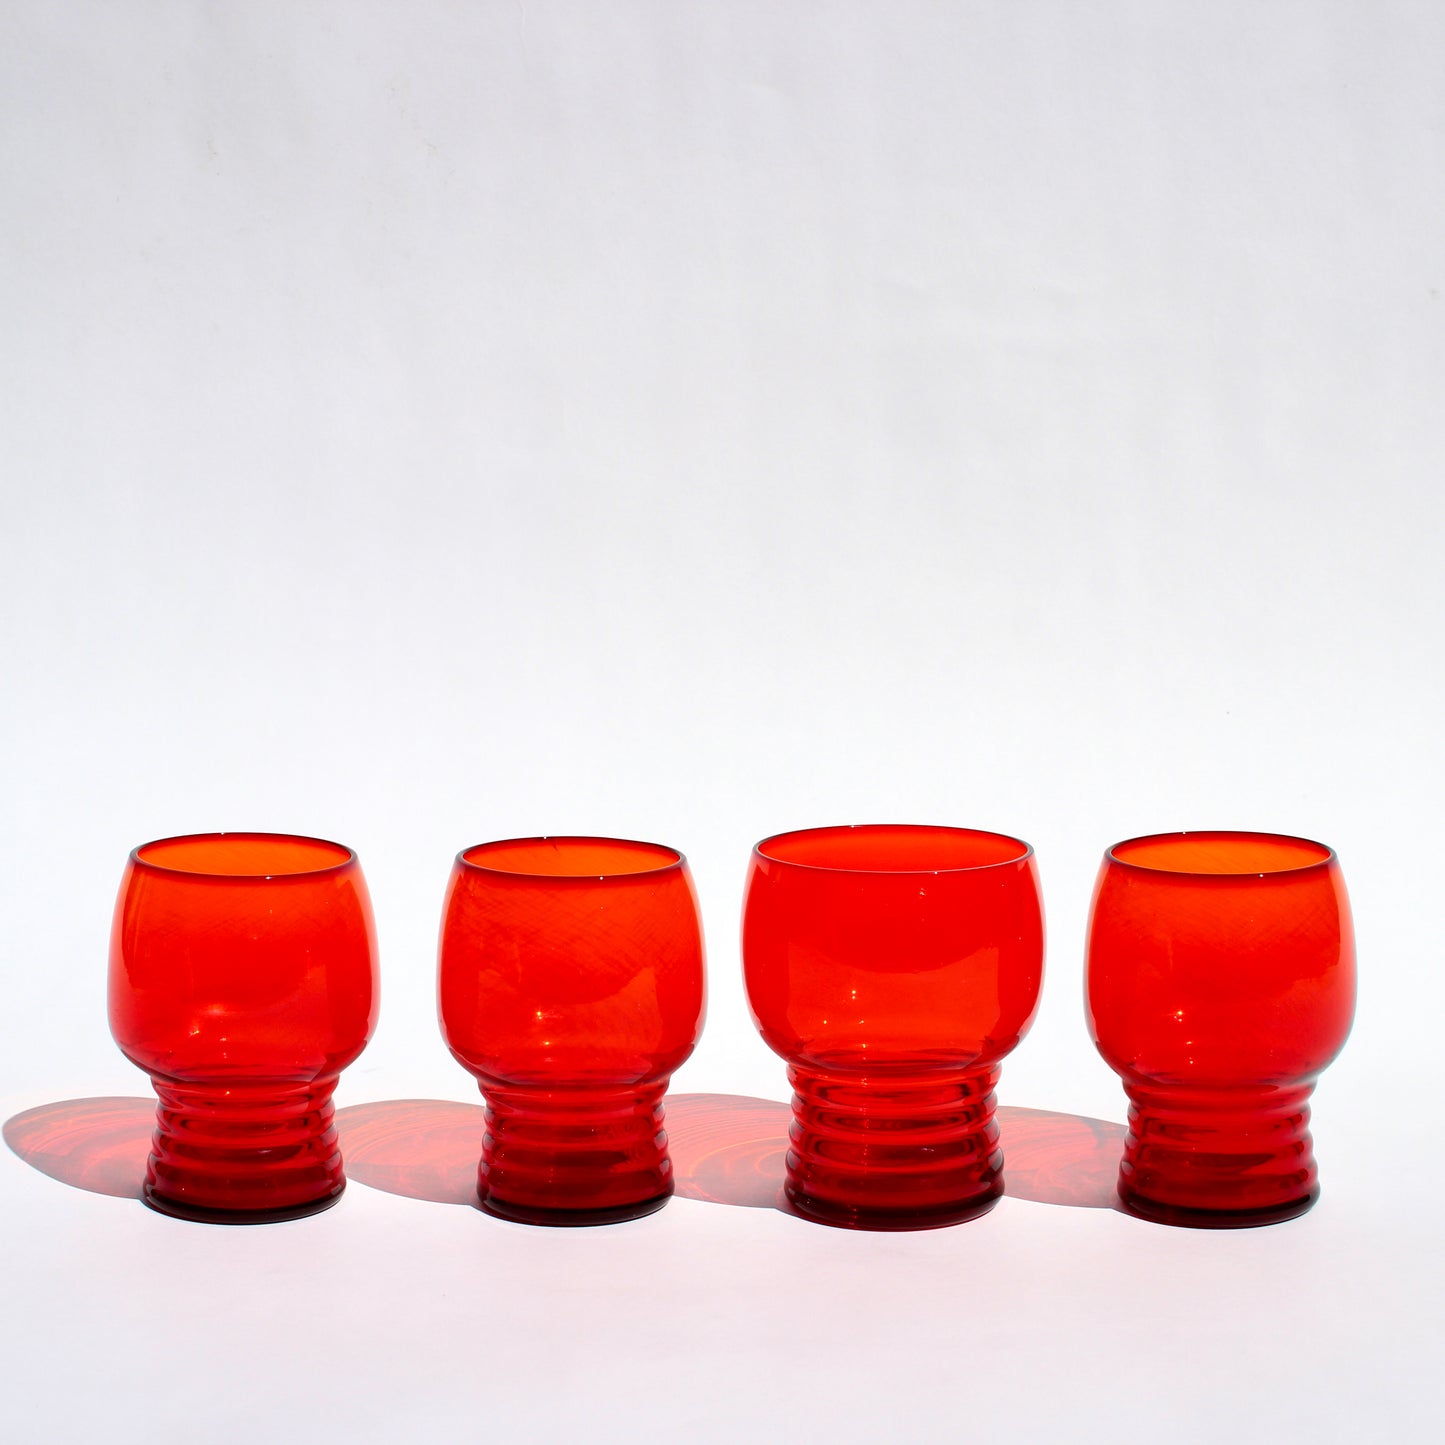 tomato red glass tumblers